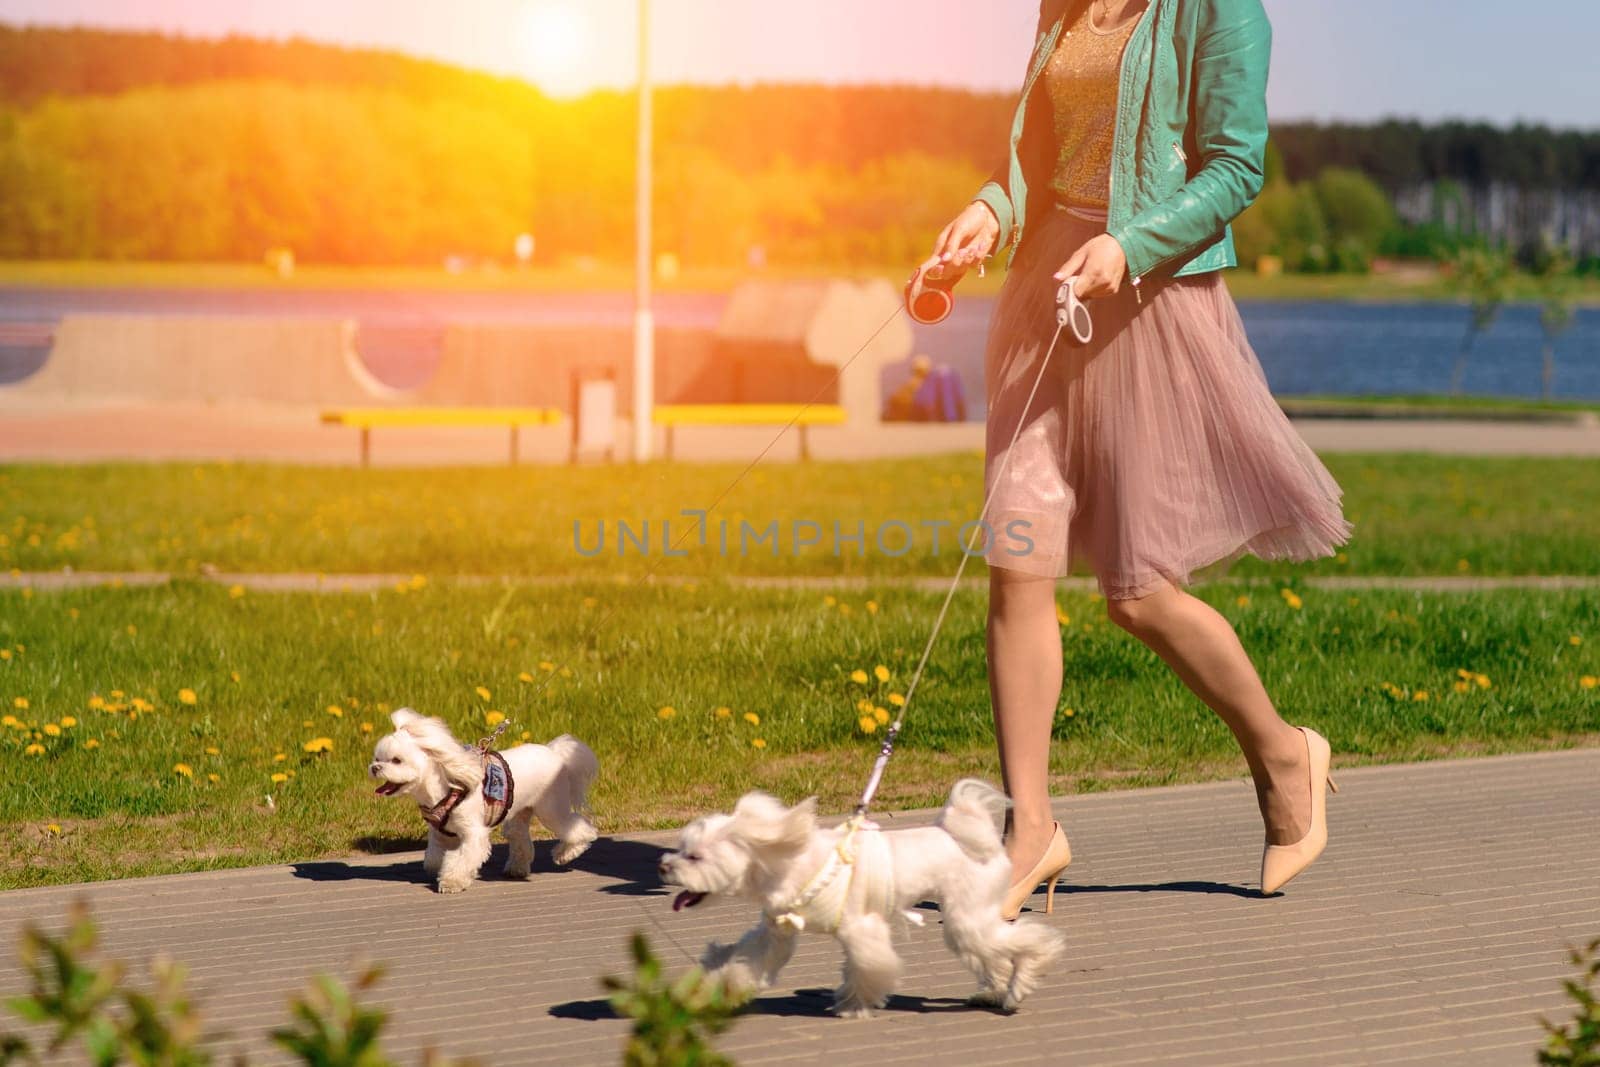 Young girl with her dog. Puppy white dog is running with it's owner. Concept about friendship, animal and freedom. by Zelenin